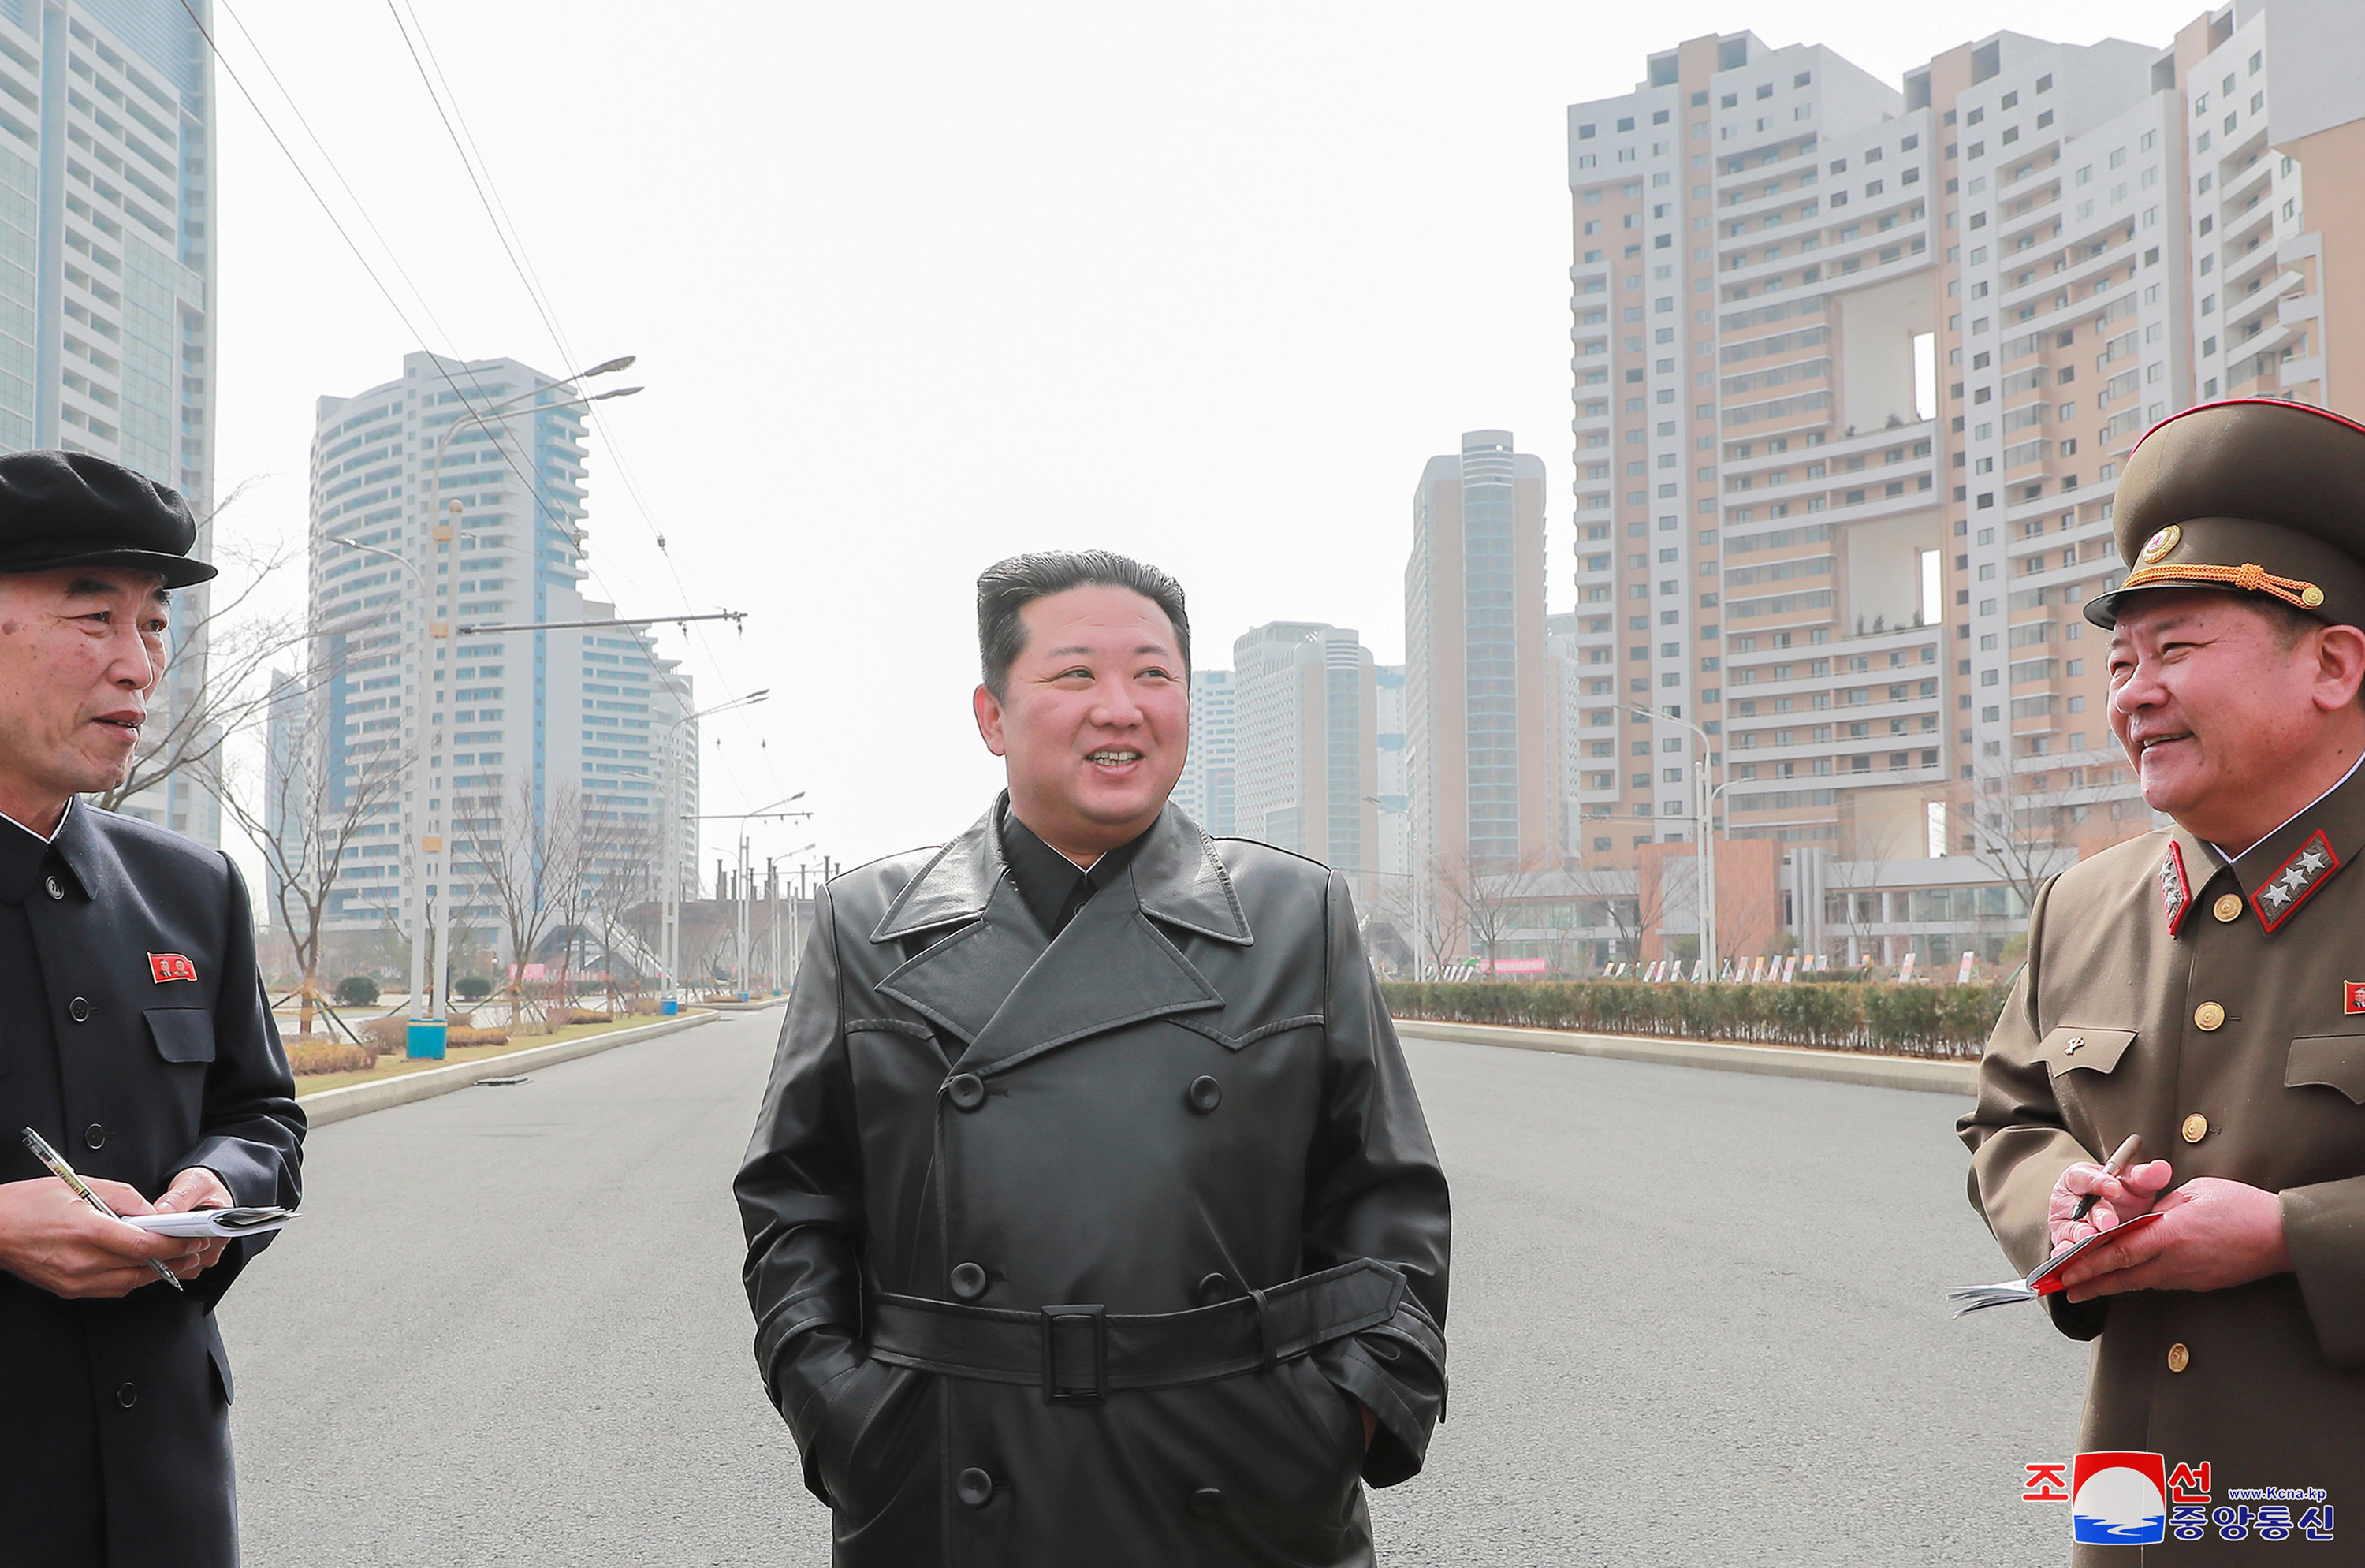 North Korea's Ambitious Plan For 50,000 New Homes Faces Financial Crunch